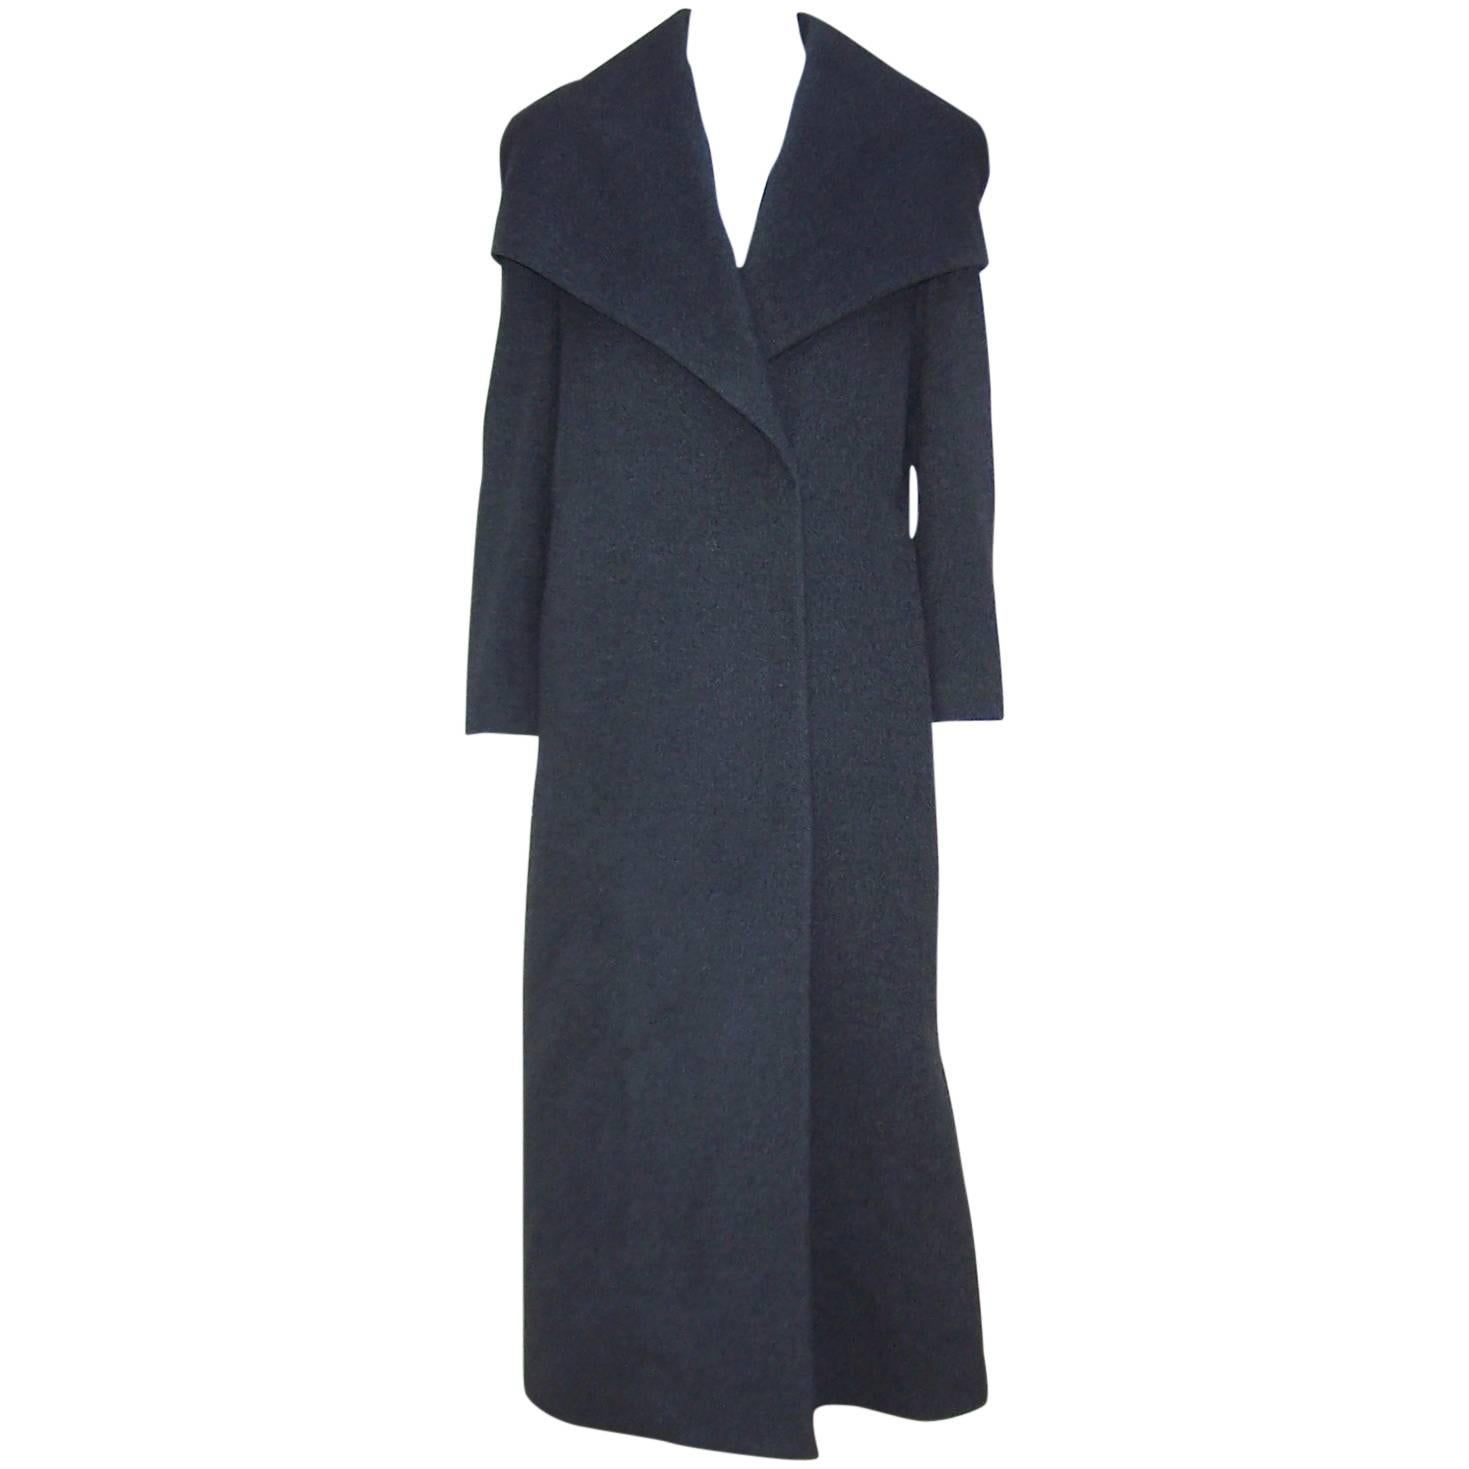 Austere 1990's Tse Charcoal Gray Cashmere Coat With Shawl Style Capelet